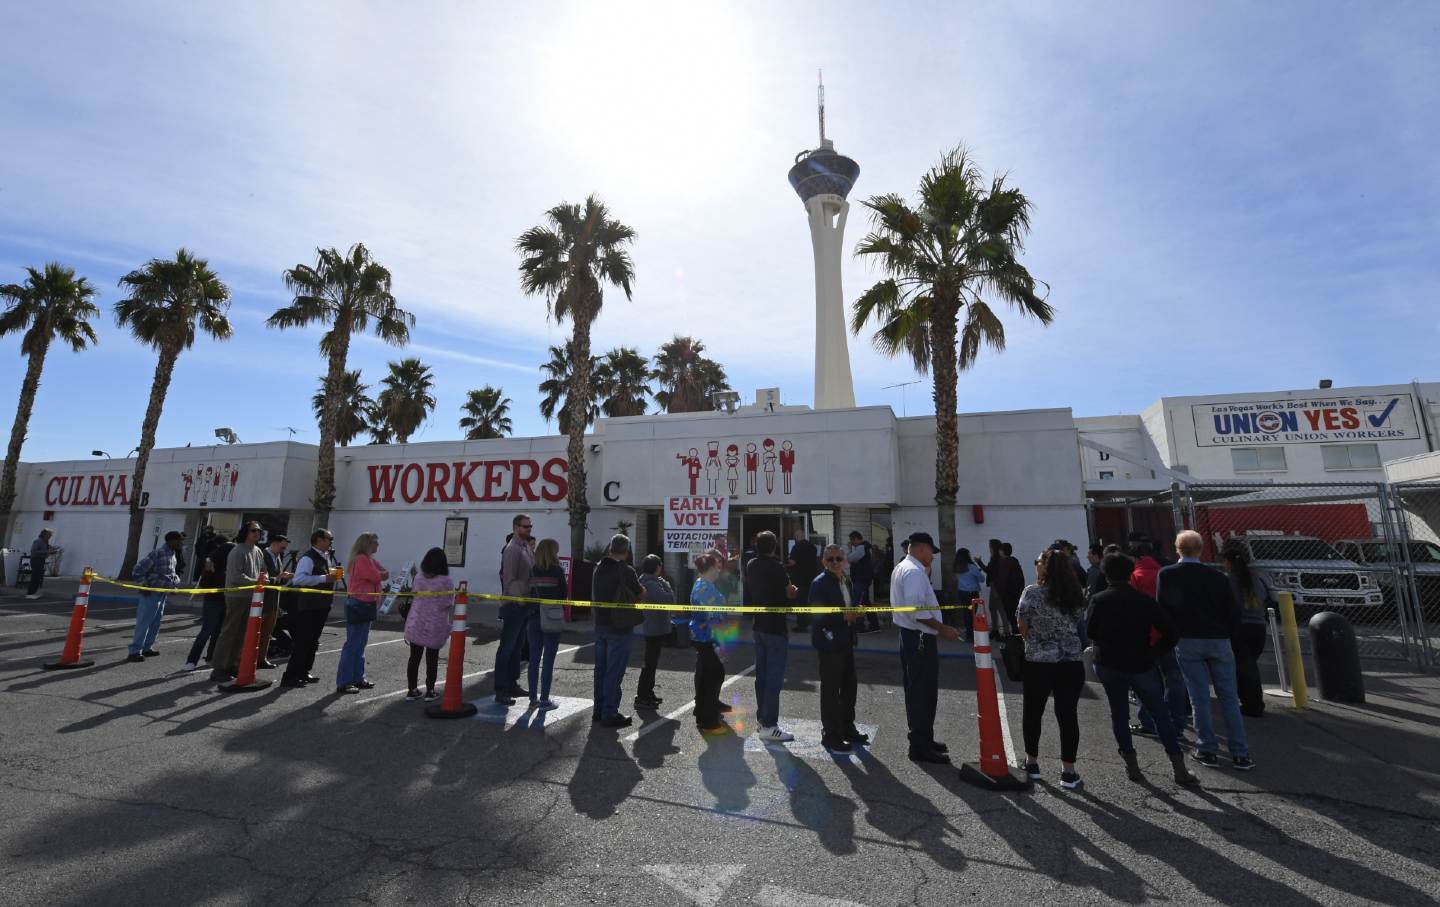 Voters line up outside the Culinary Workers Union Hall in Las Vegas